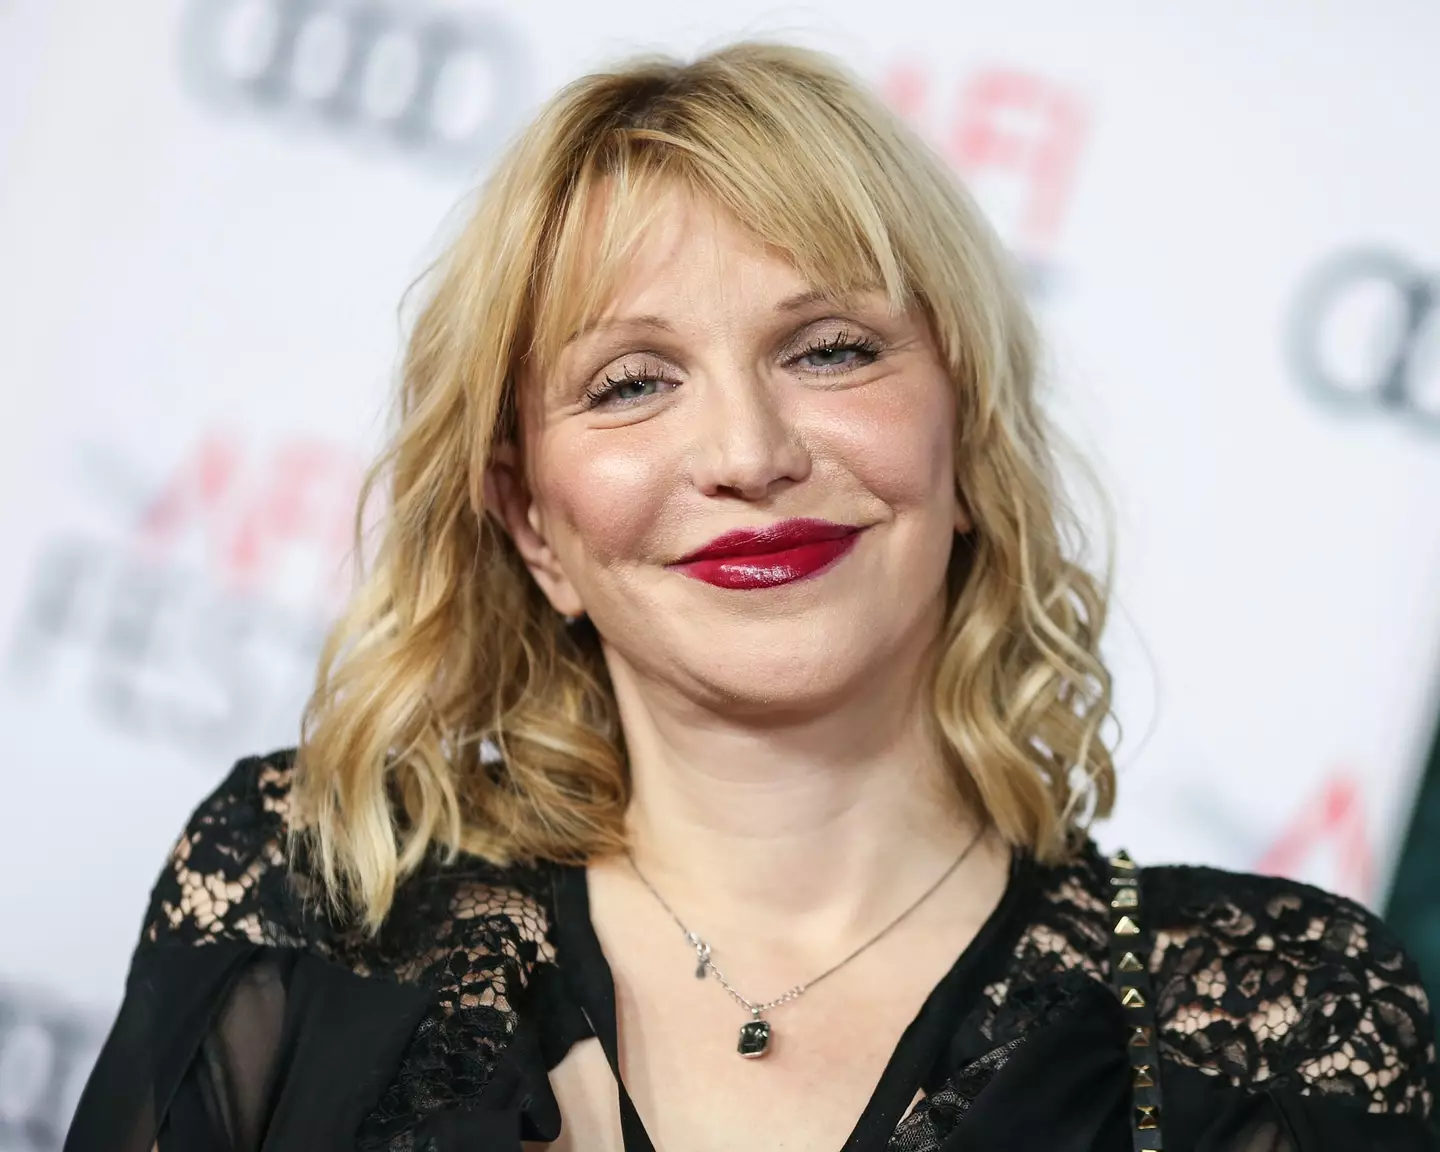 Courtney Love says she was originally set to appear in Fight Club.